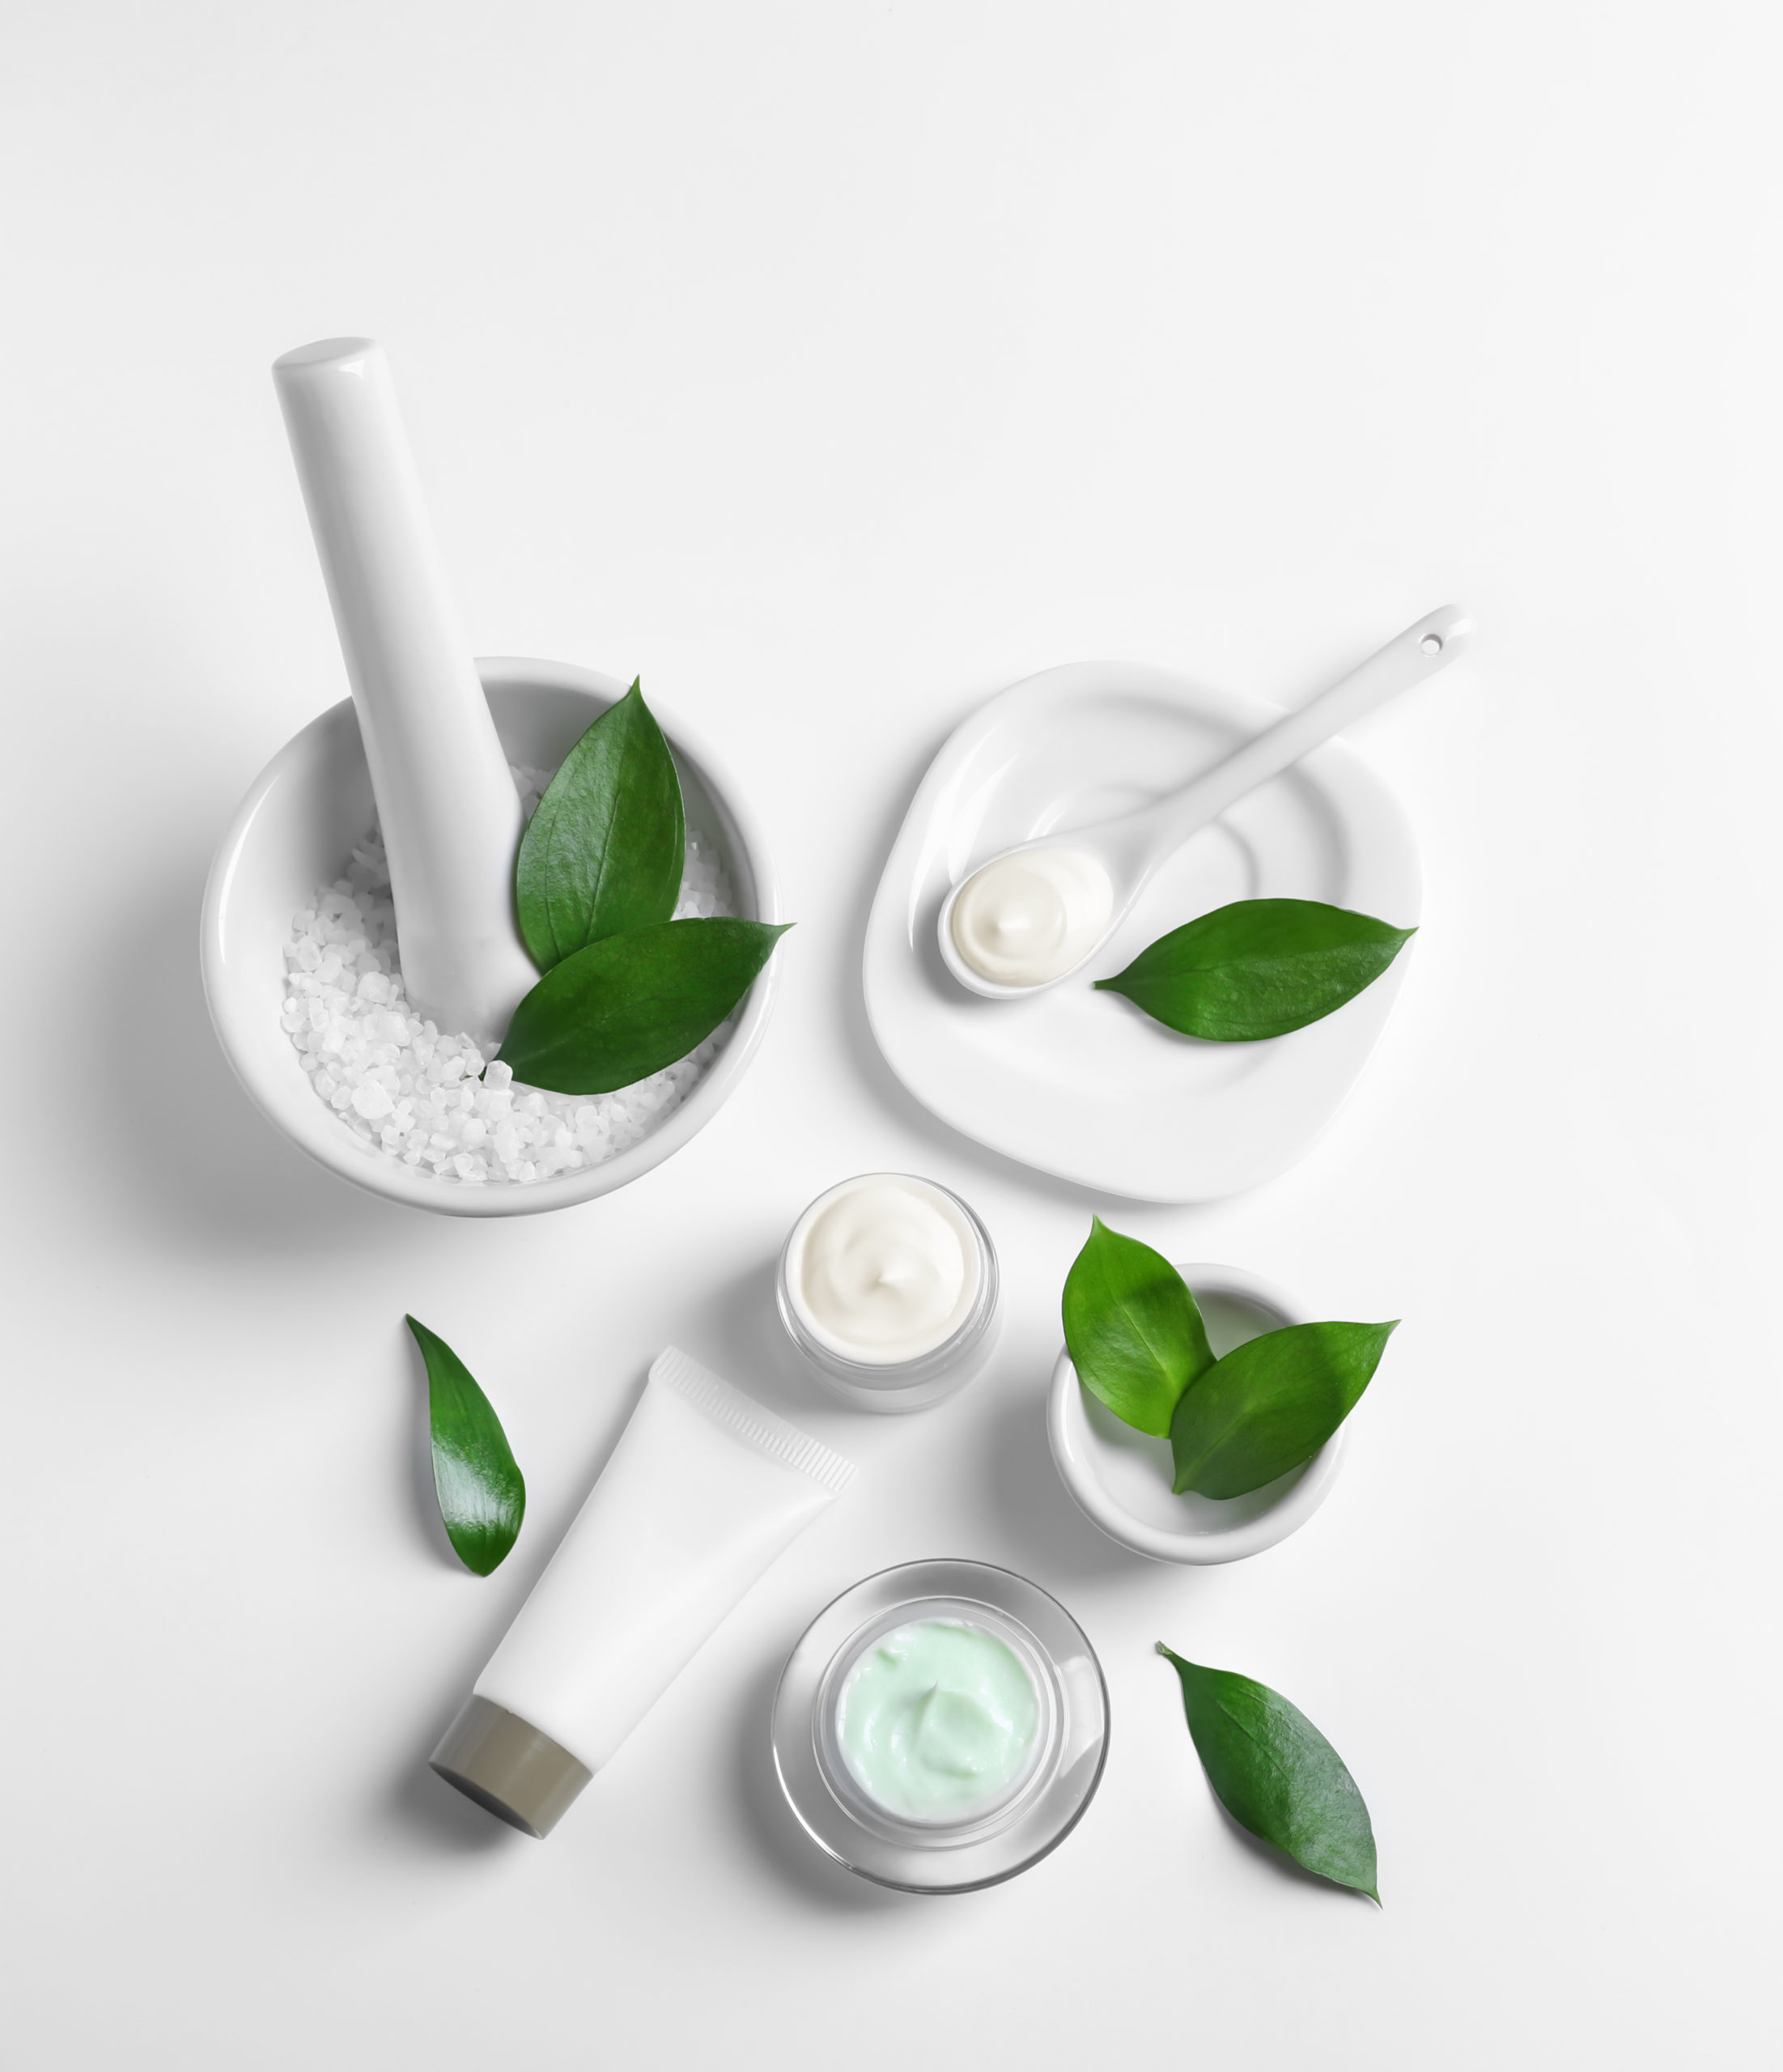 Cosmetic ingredients on a white background.